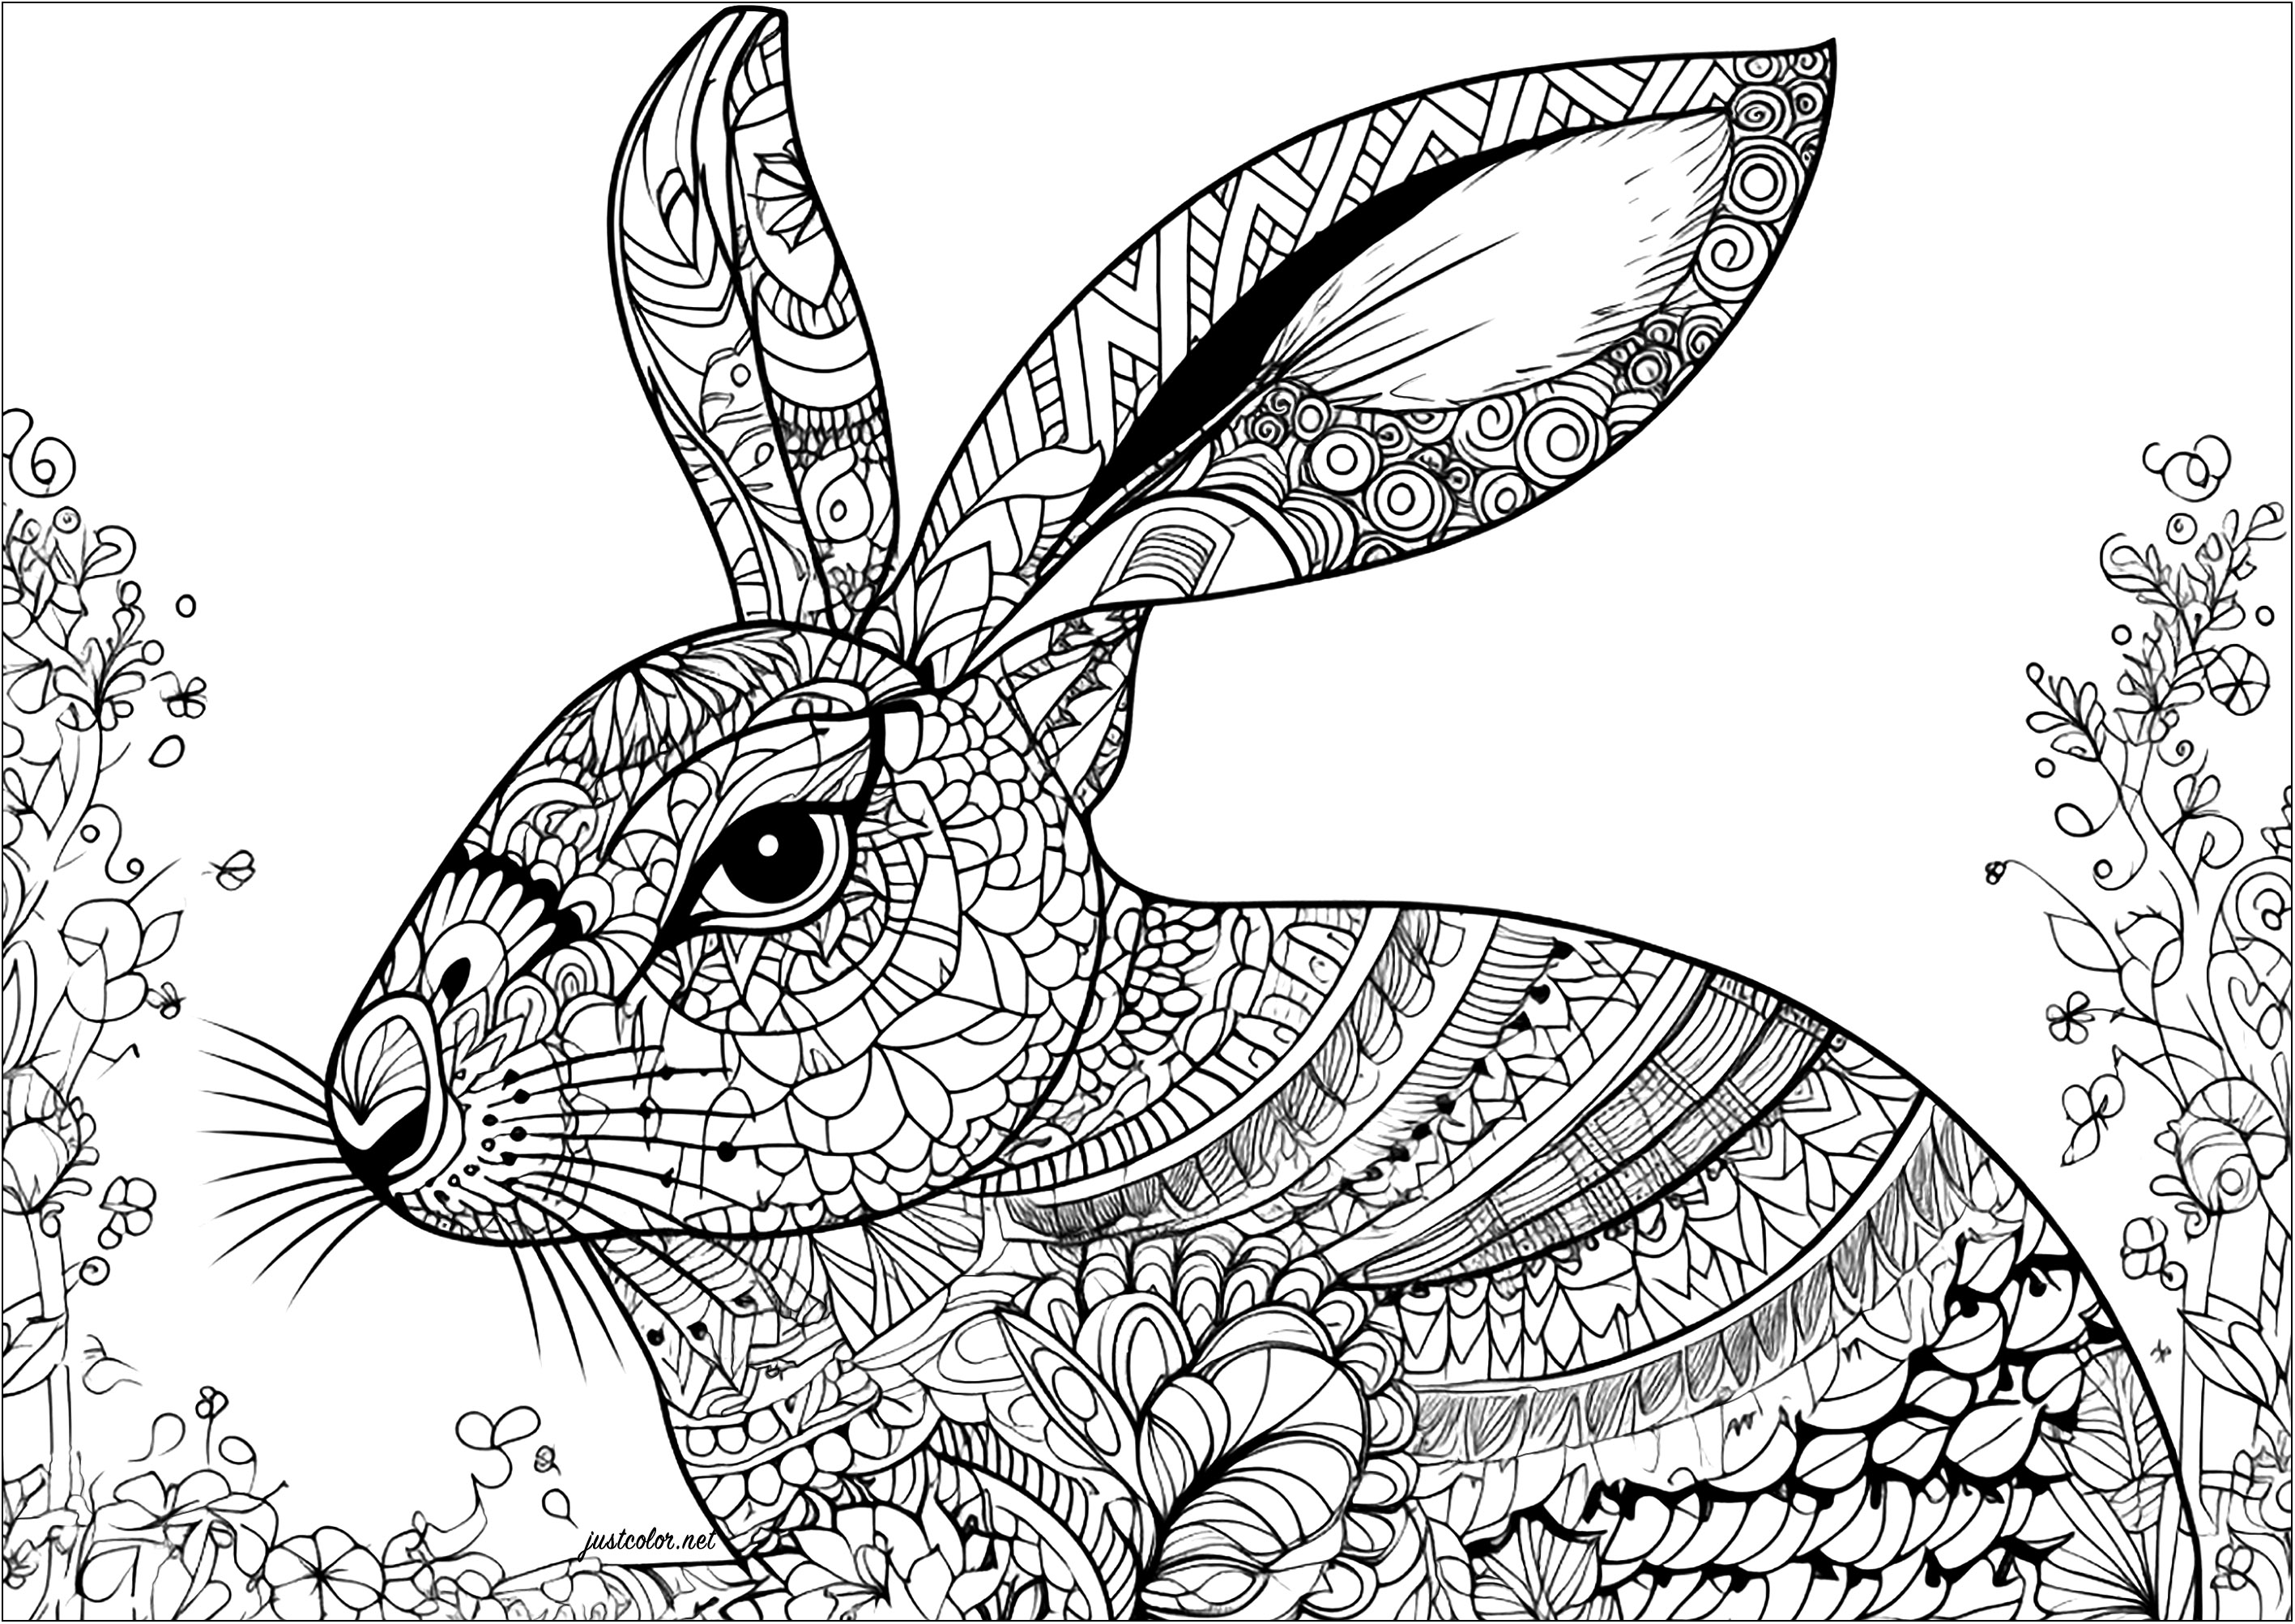 Rabbit and complex patterns. A beautiful rabbit coloring page with intricate and diverse patterns. This coloring will take you a long time but will give you a great relief.